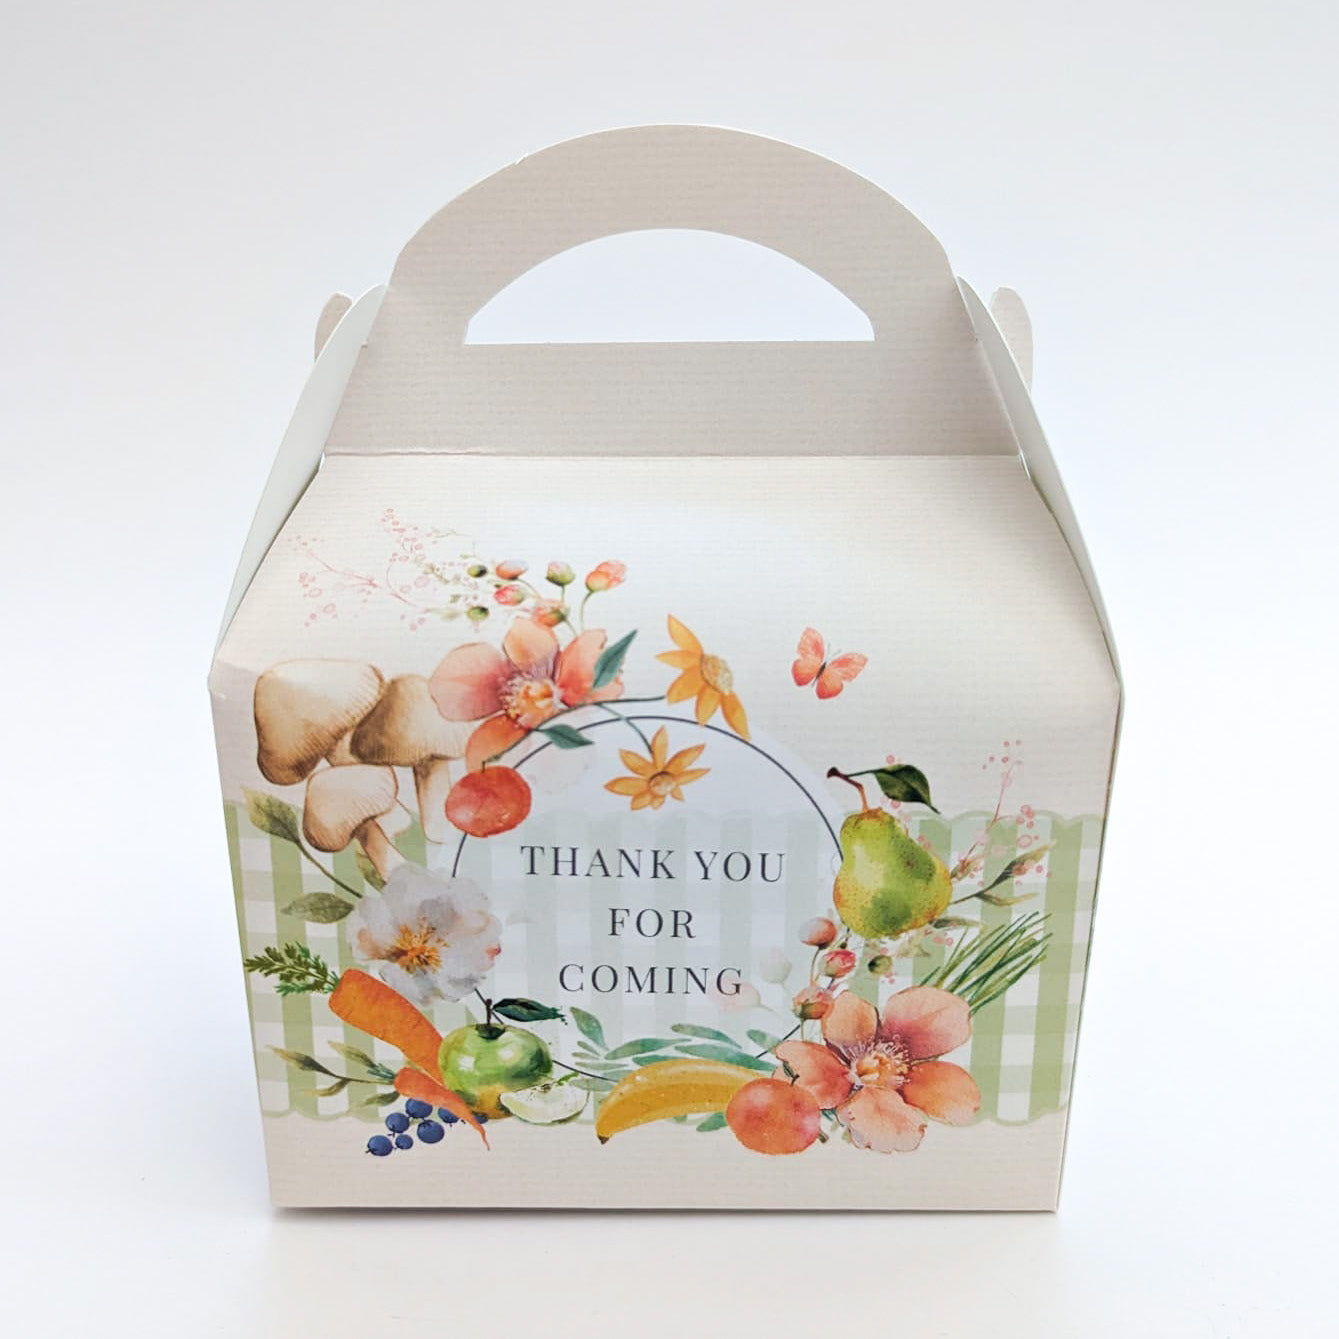 FARMERS MARKET Fruit and Veg Personalised Children’s Party Box Gift Bag Favour